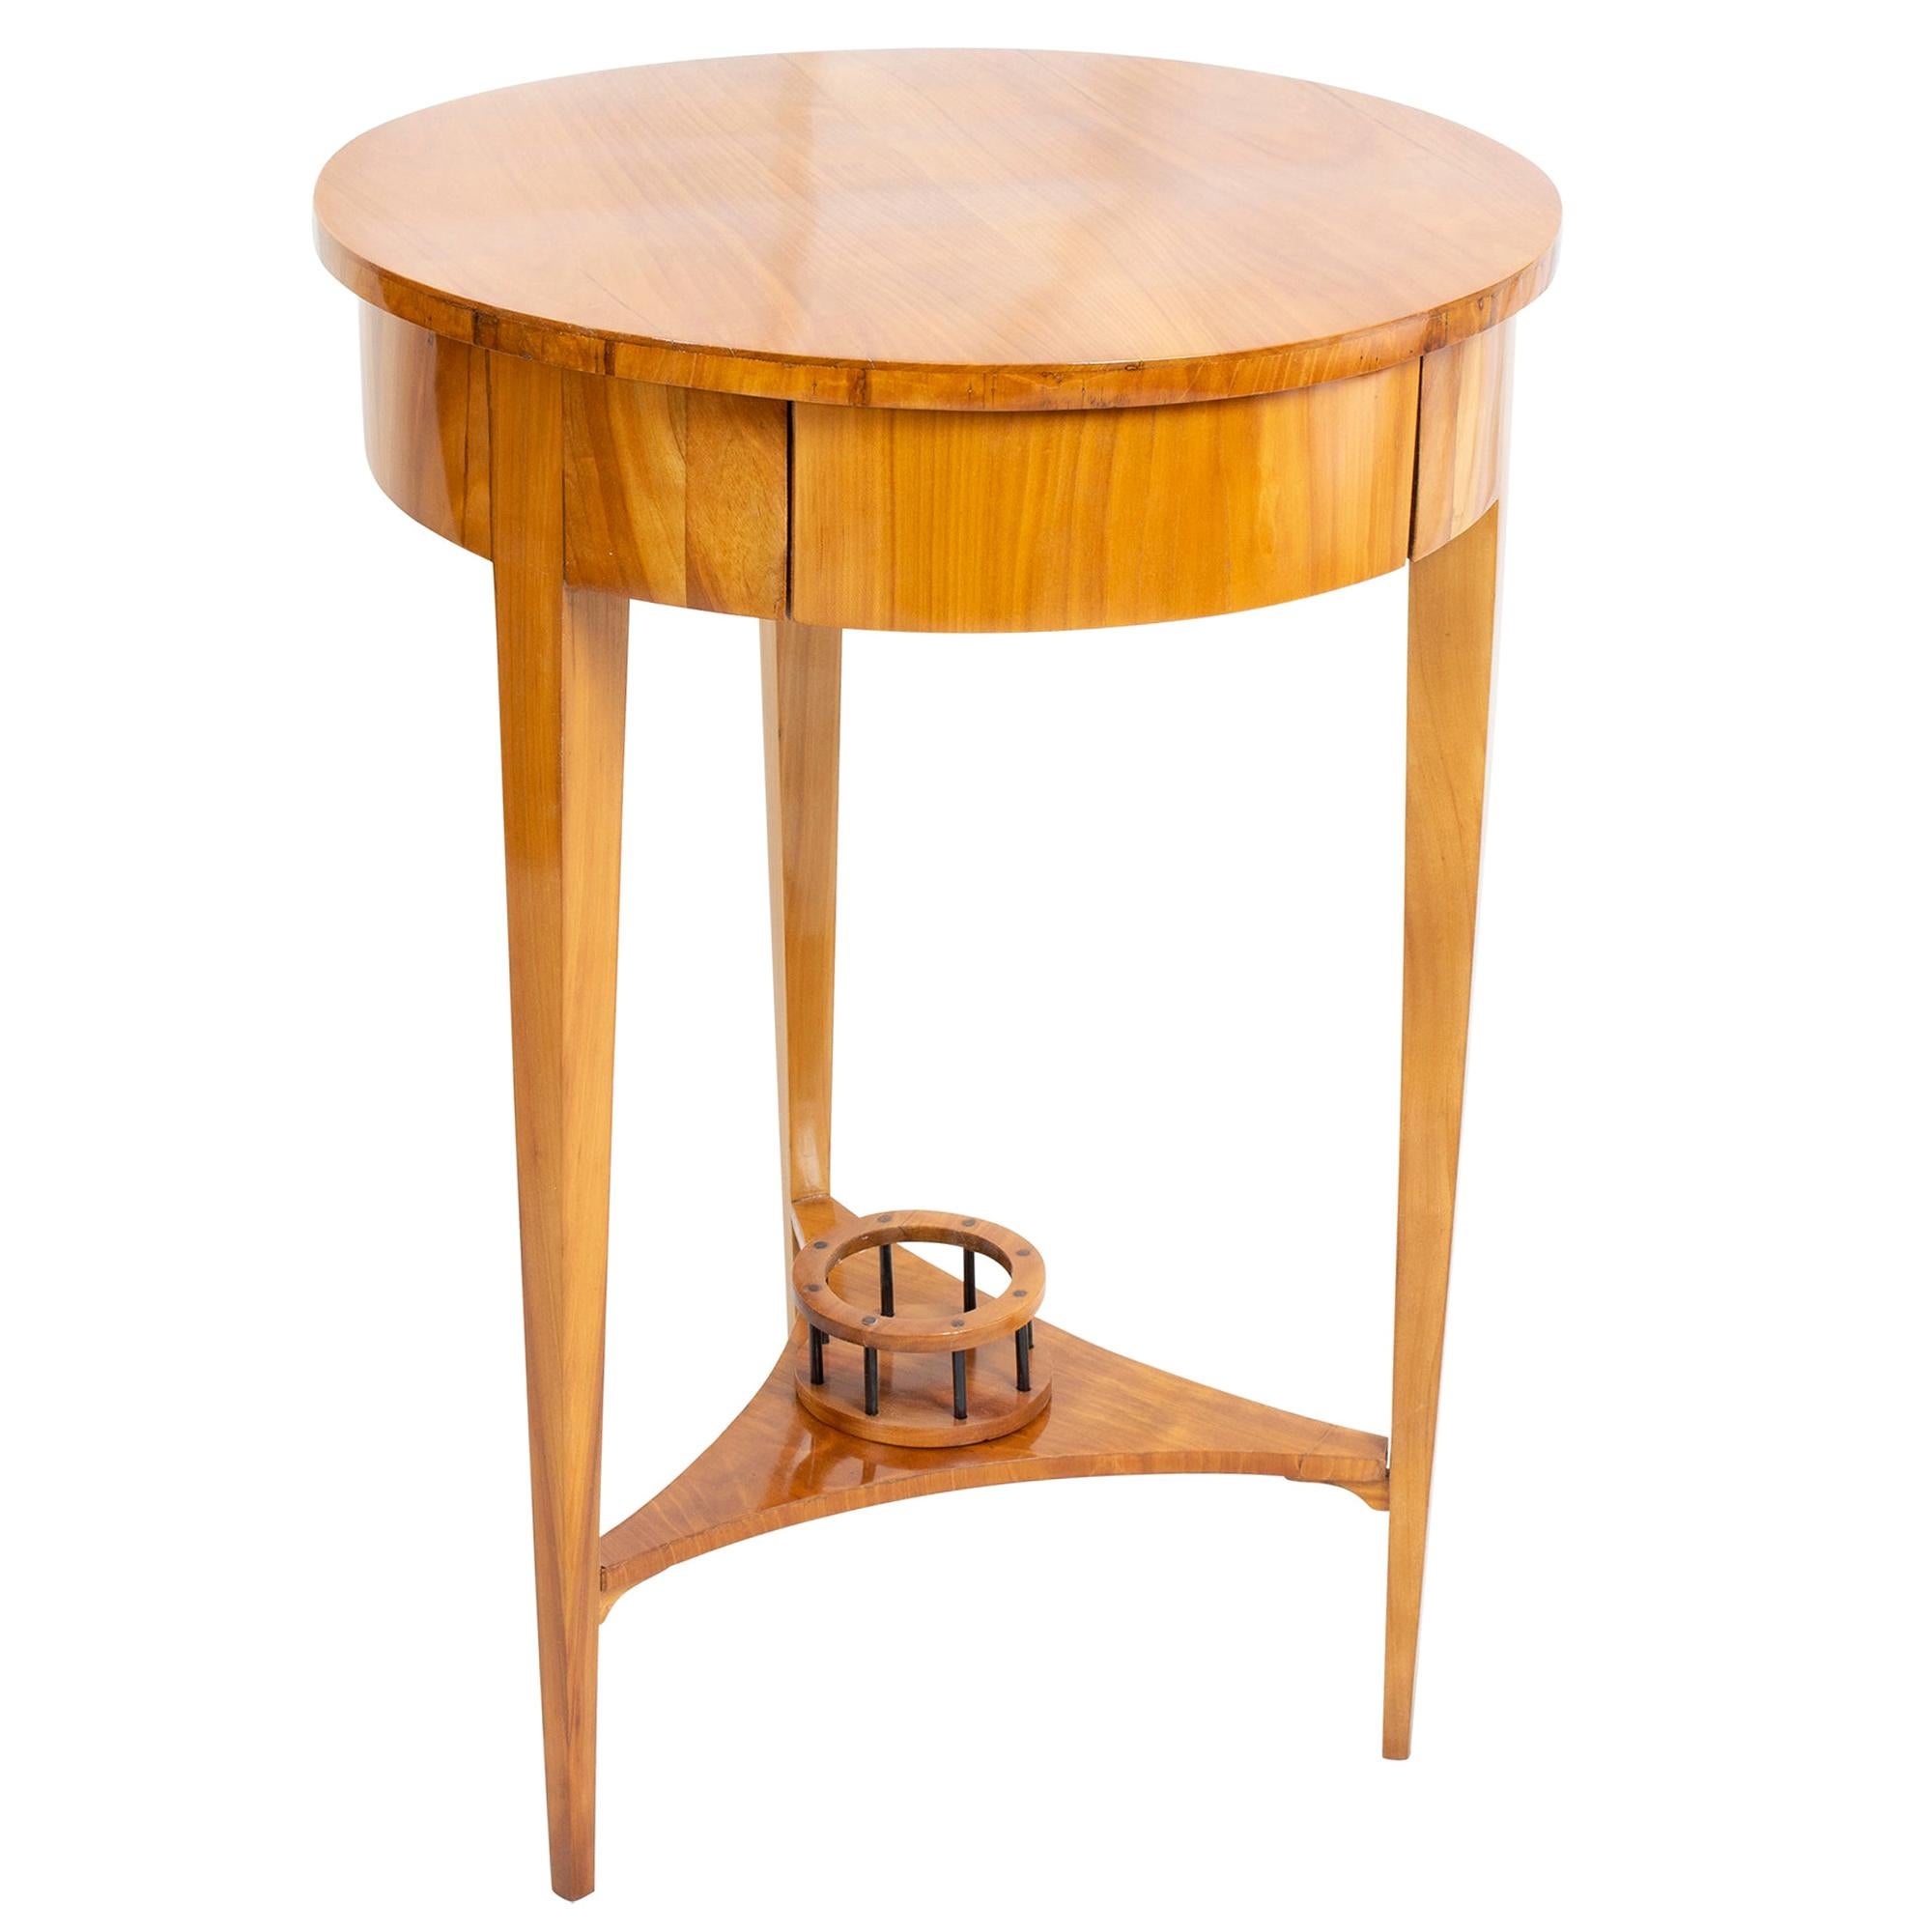 19th Century Biedermeier Round Drum Sewing Table For Sale